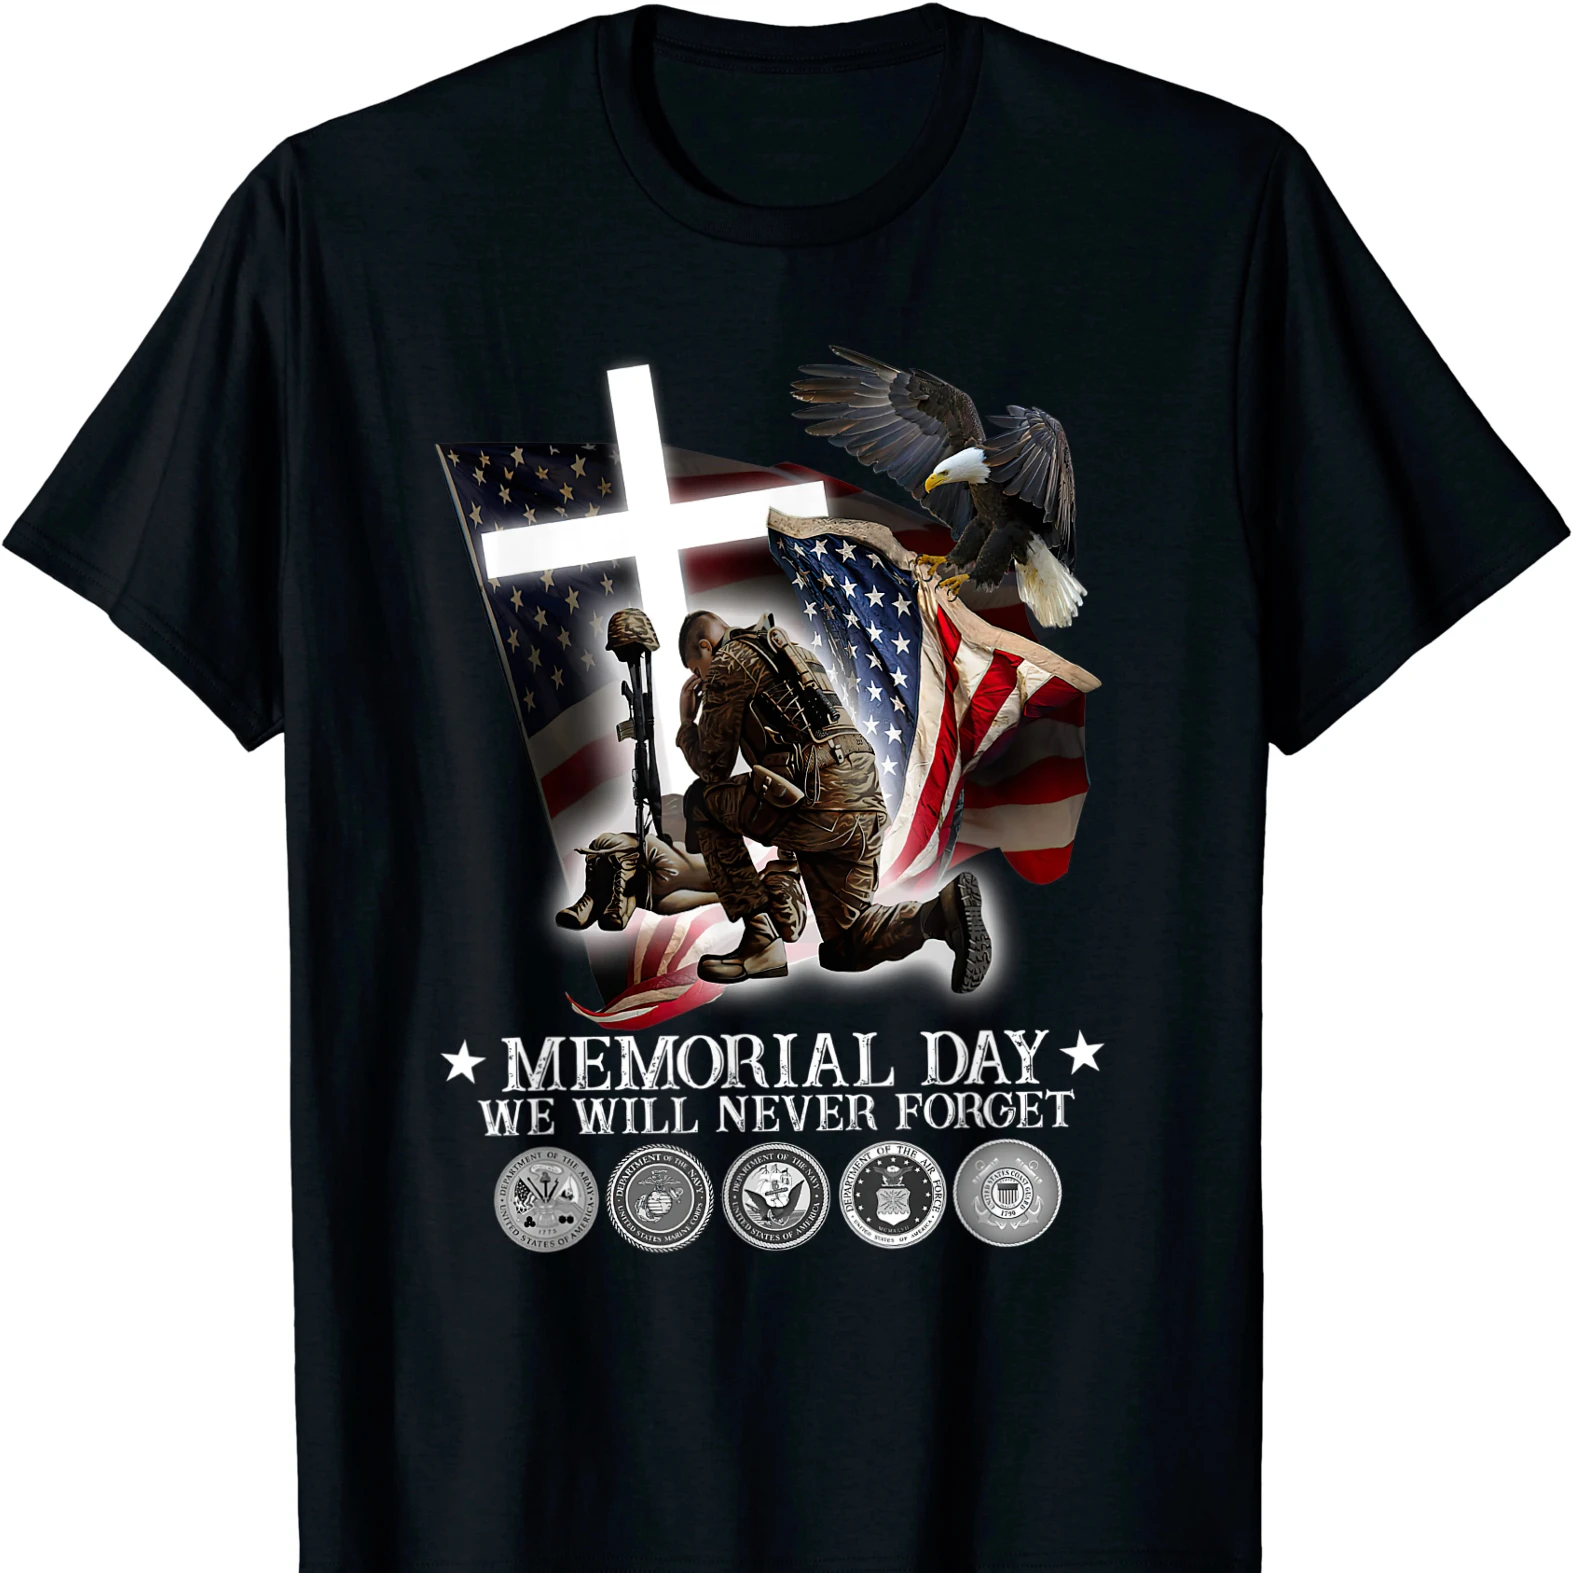 

Memorial Day We Will Never Forget Veteran Lovers T Shirt New 100% Cotton Short Sleeve O-Neck T-shirt Casual Mens Top